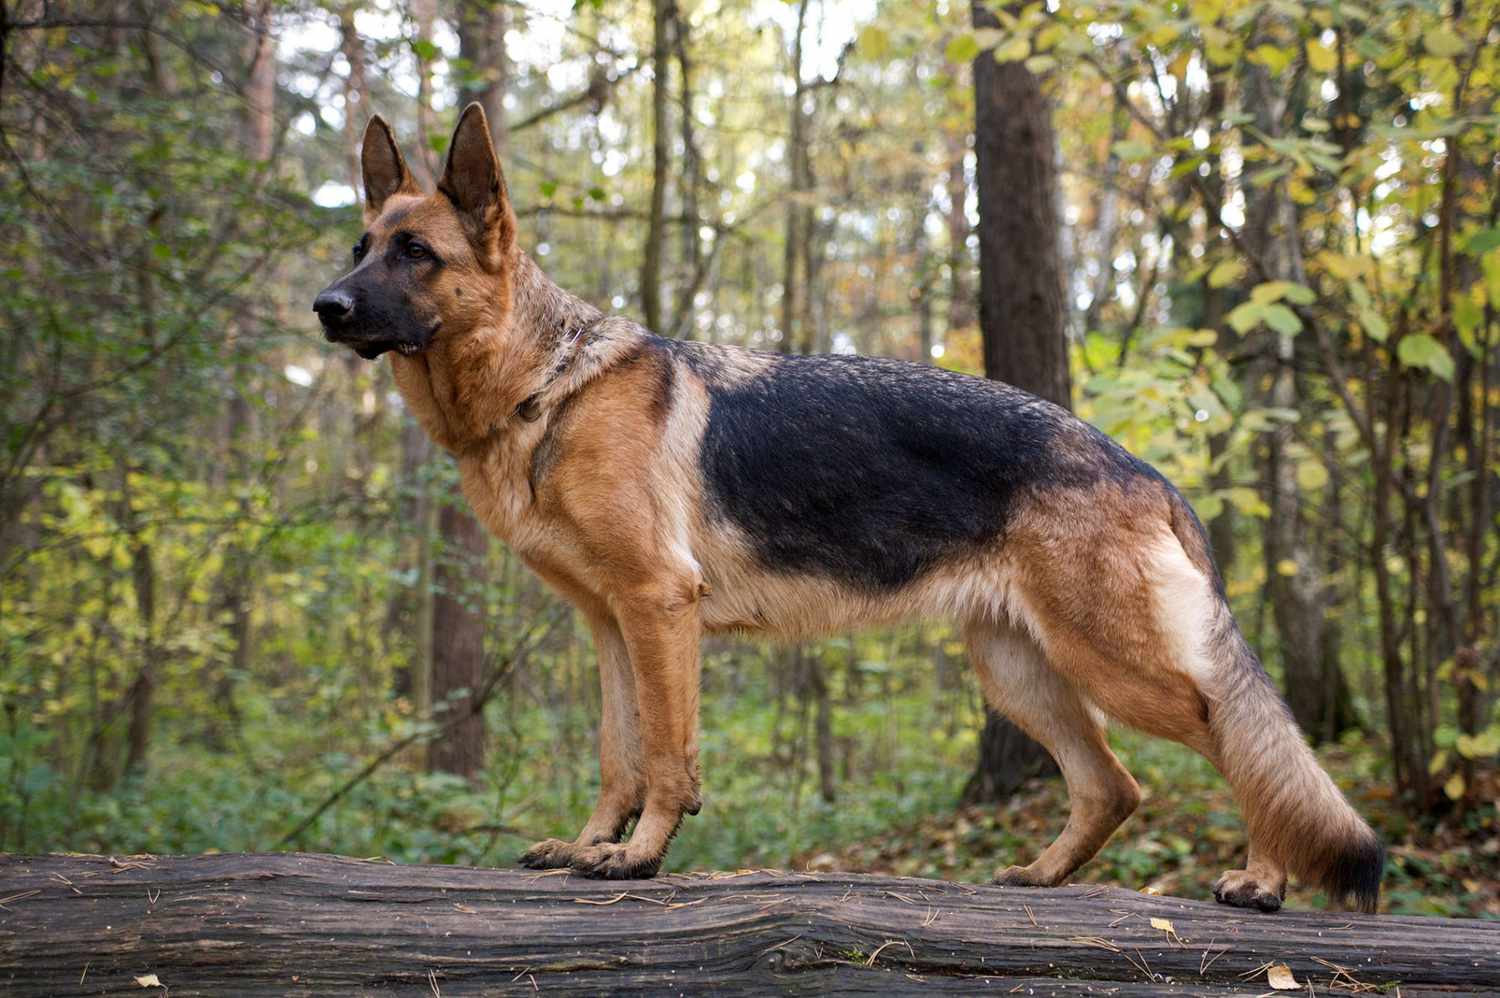 German Shepherd Dog Breed Information And Characteristics Daily Paws